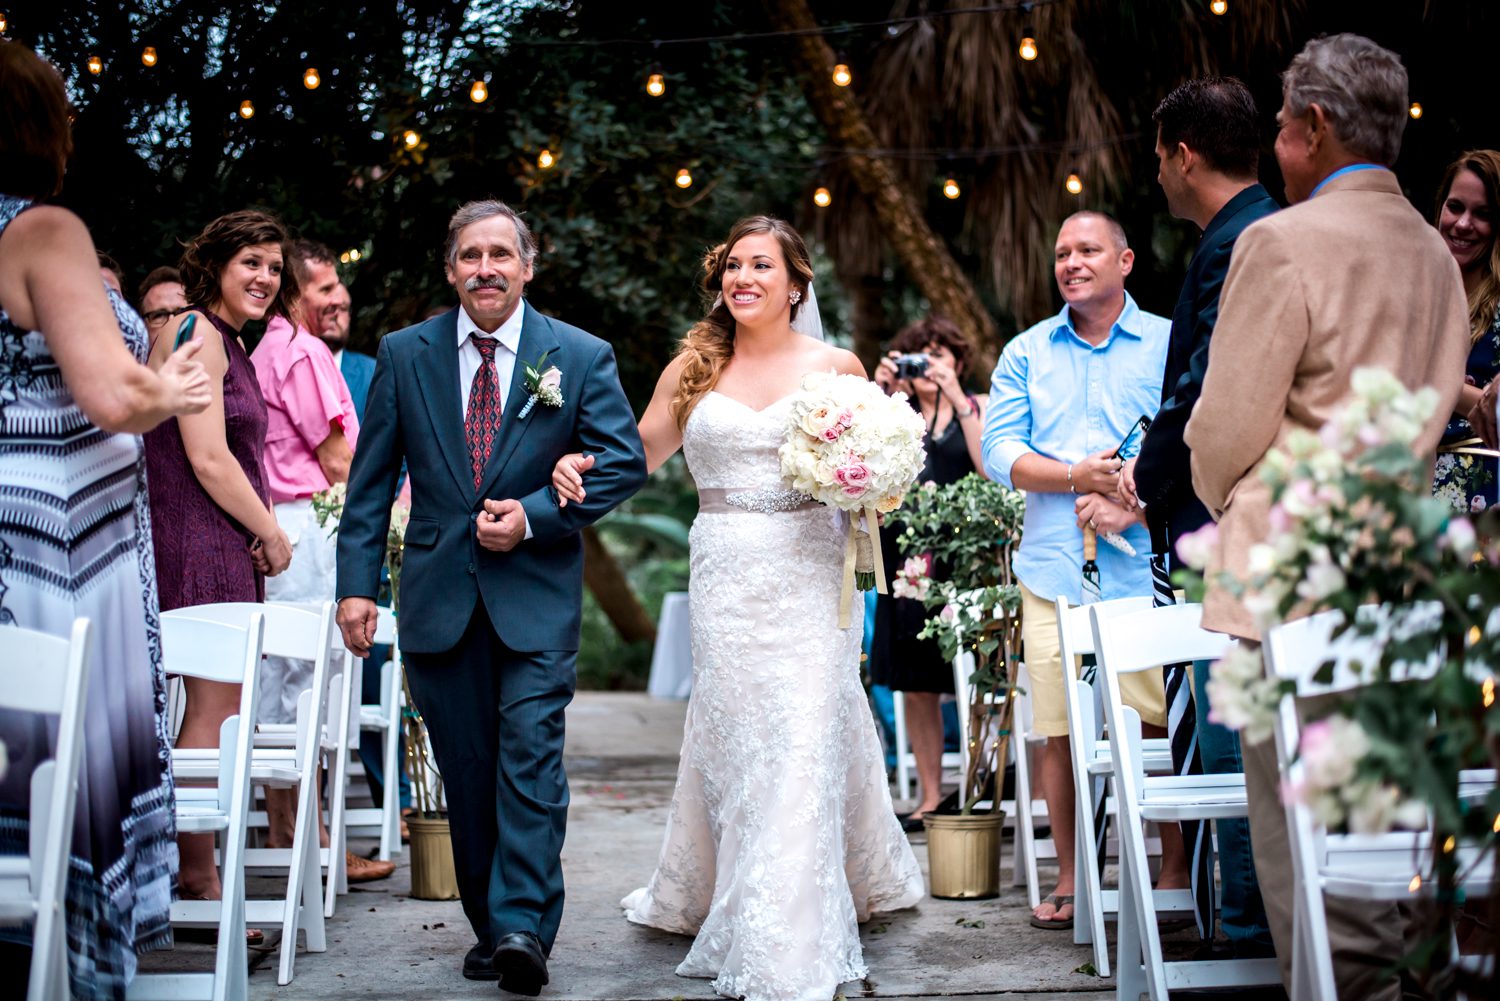 Wendy & Michael's Key West wedding captured by Freas Photography as the bride walks down the aisle with her father.